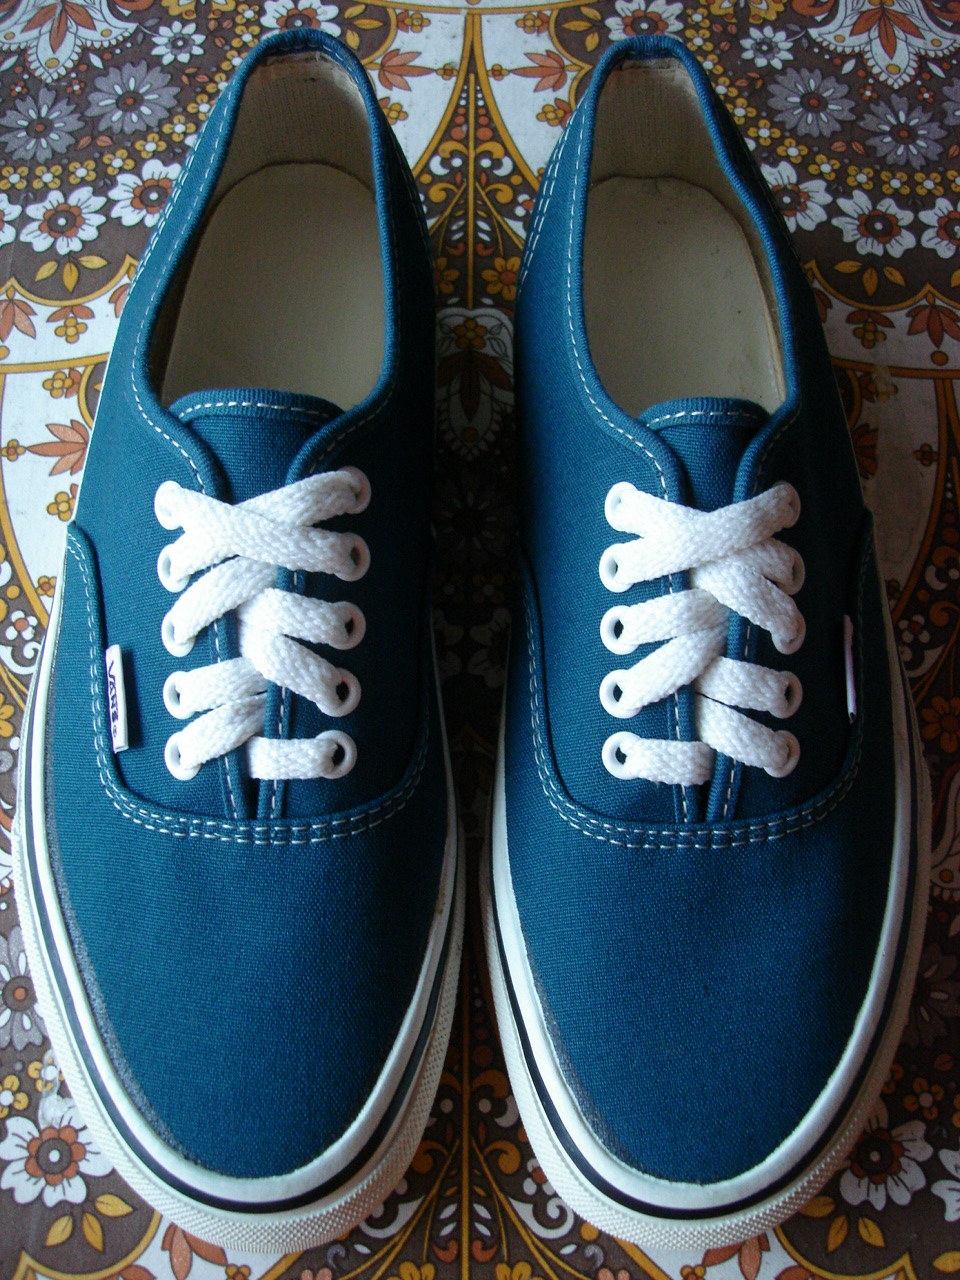 theothersideofthepillow: vintage VANS solid china blue canvas AUTHENTIC ...